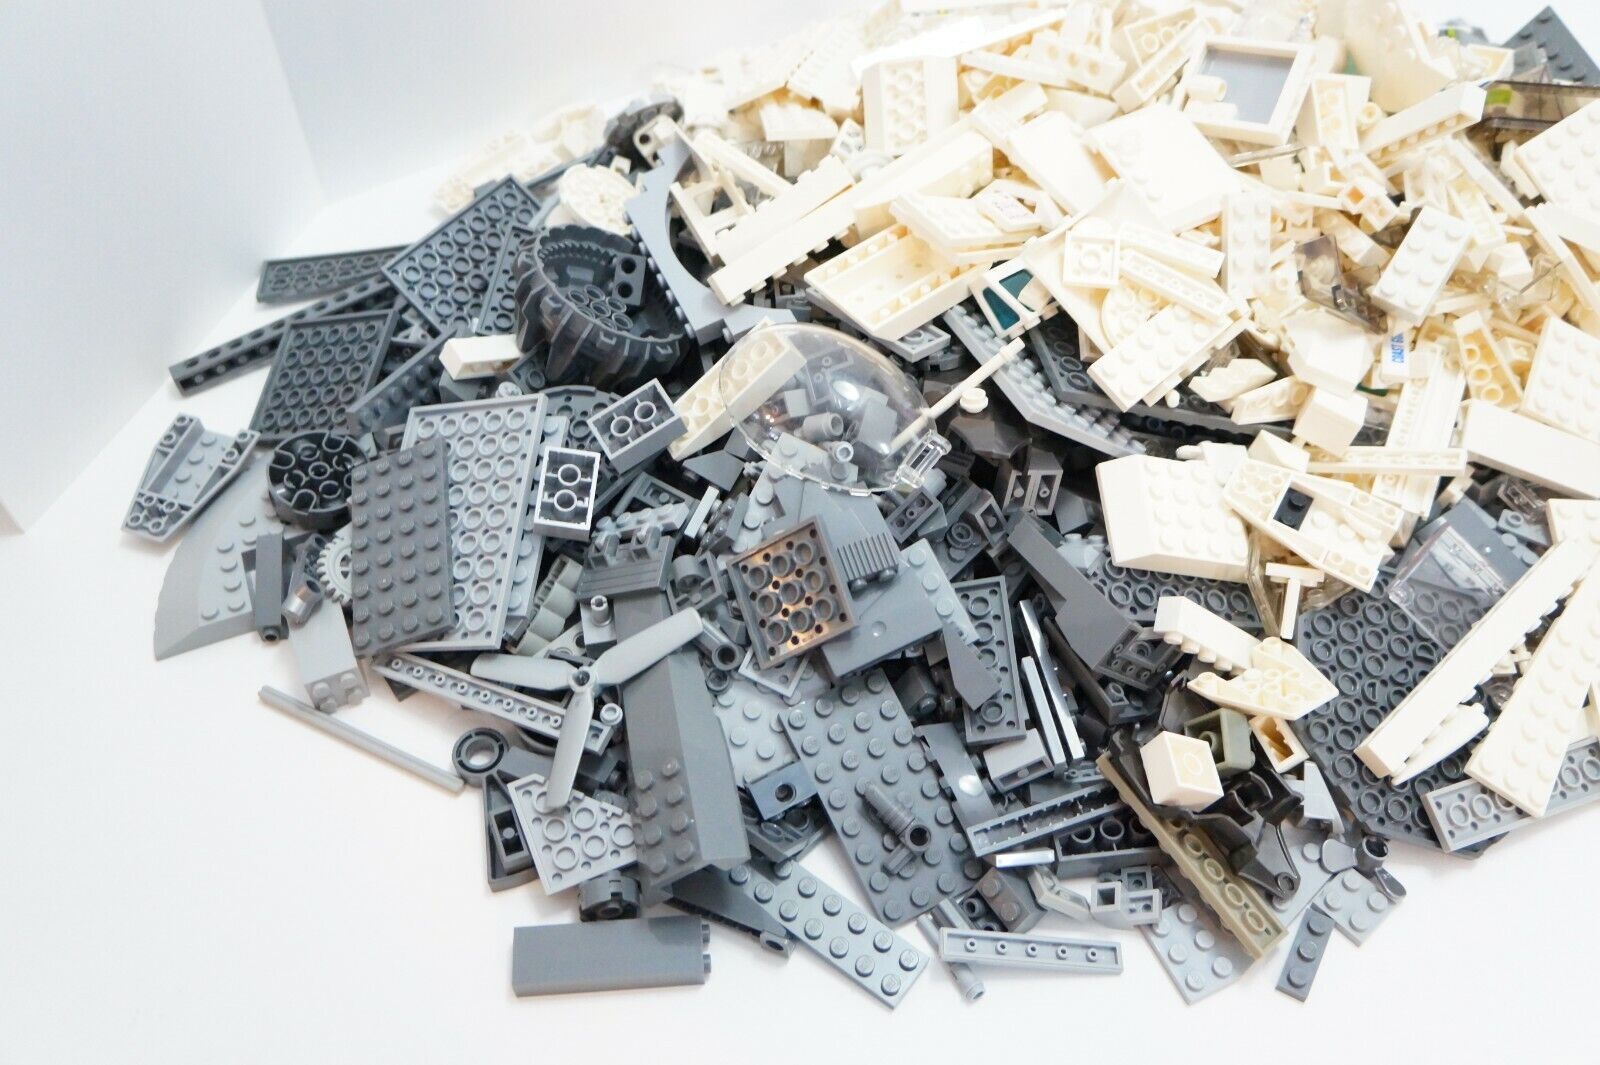 LEGO BRICKS PARTS PIECES - OVER 5 POUNDS - GREY WHITE CLEAR - LEGOS MIXED  LOT